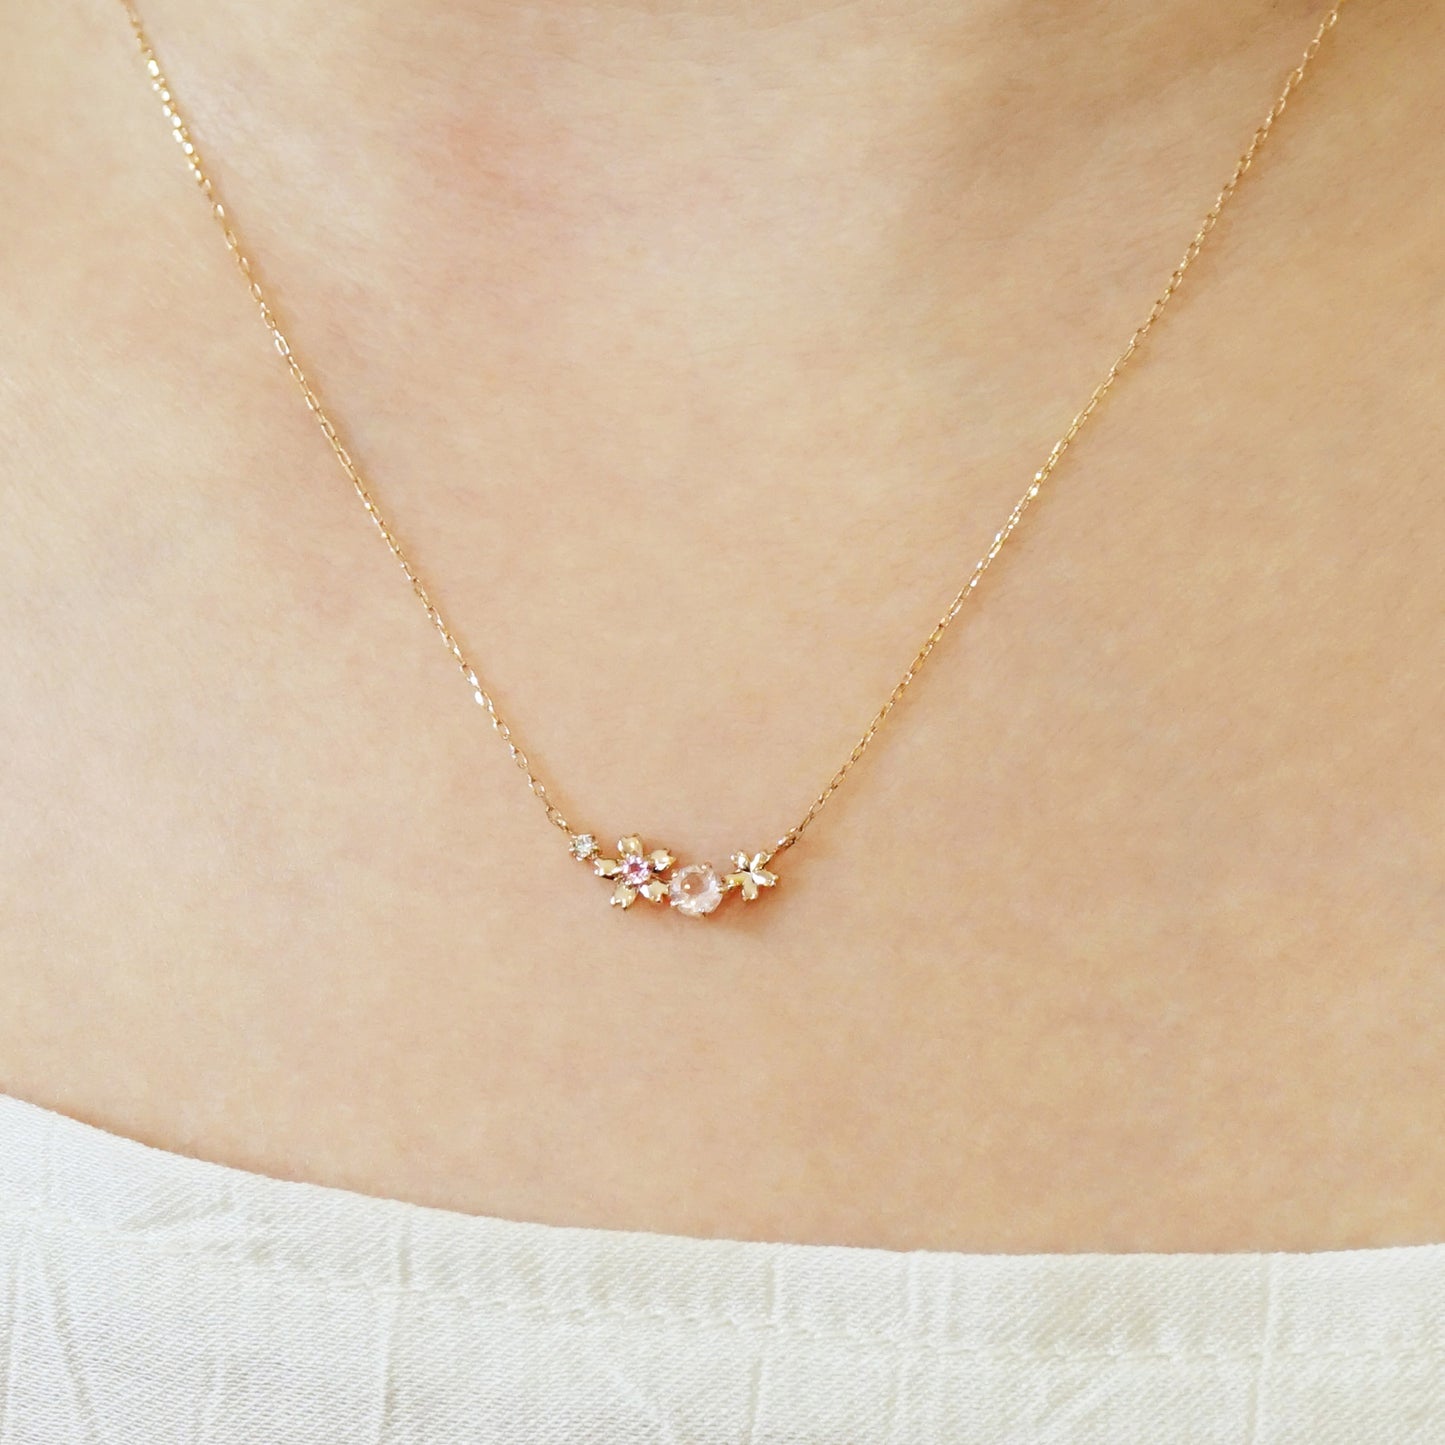 [Birth Flower Jewelry] April - Cherry Blossoms Horizontal Line Necklace (10K Rose Gold) - Model Image